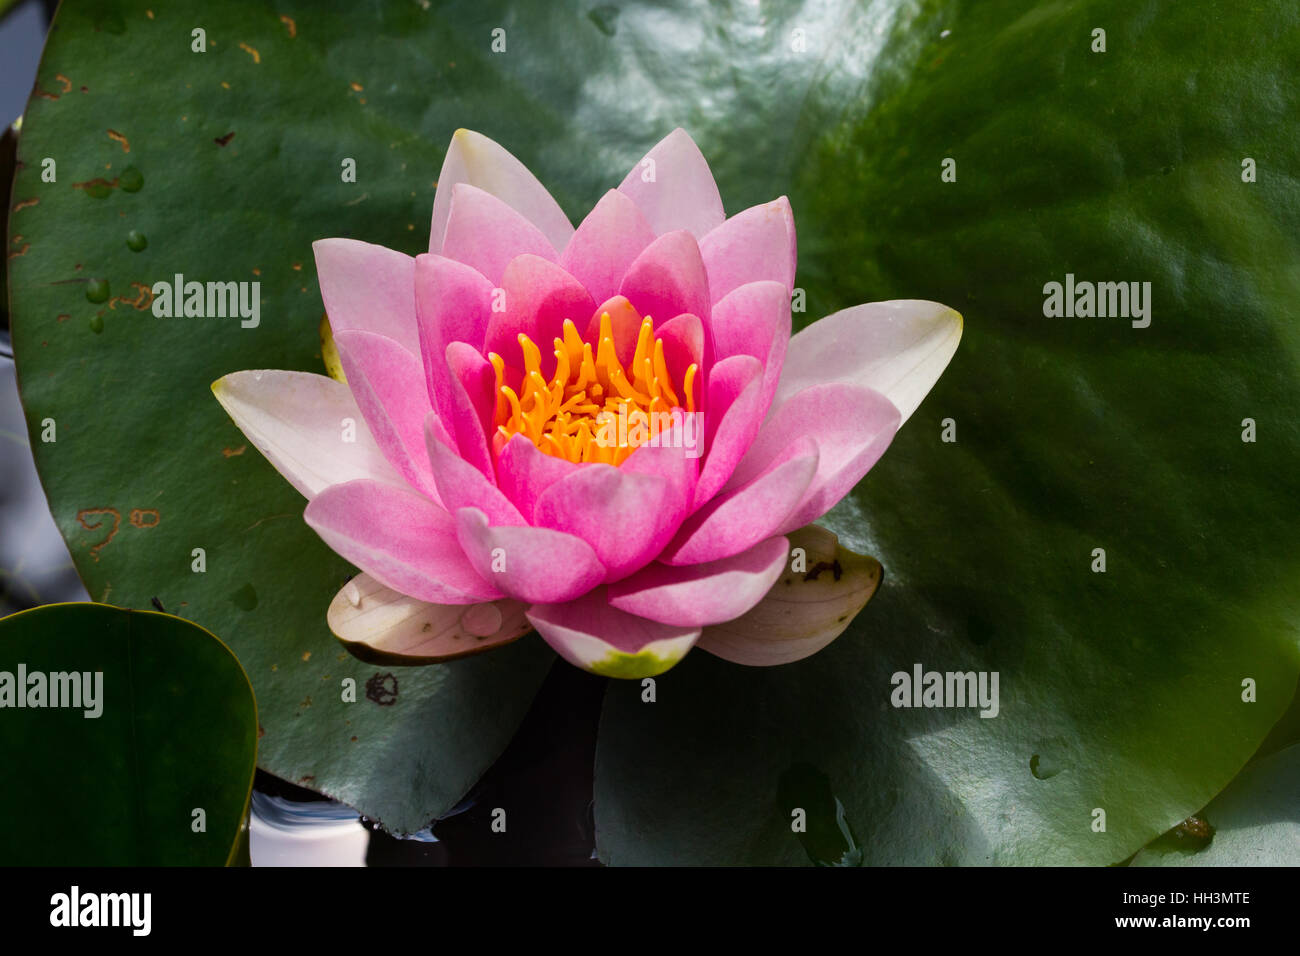 natural pink blossom of nymphaea flower with leaf Stock Photo